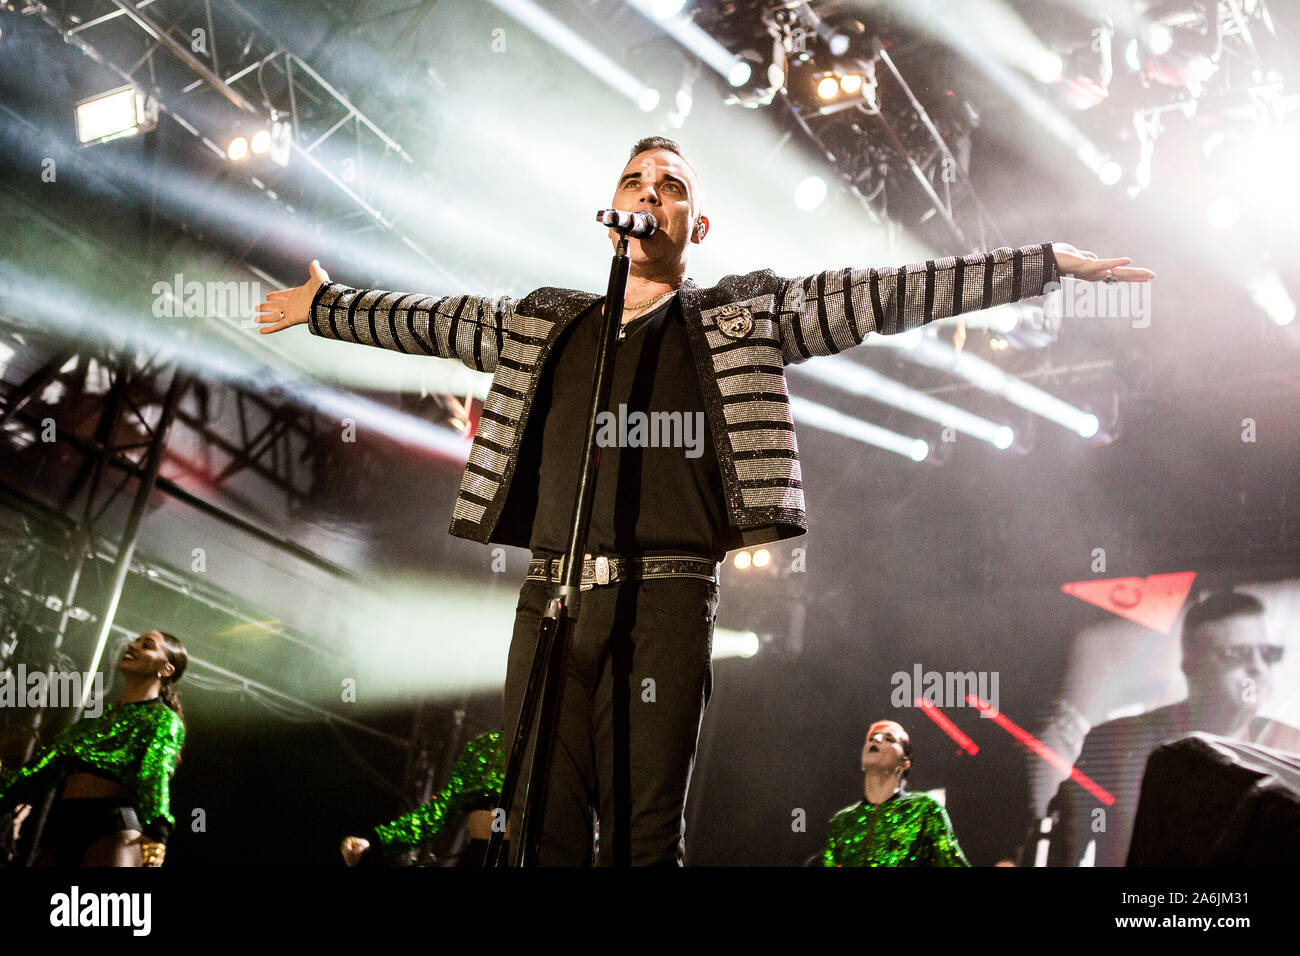 Skanderborg, Denmark. 07th, August 2019. Robbie Williams, the English singer, songwriter and musician, performs a live concert during the Danish music festival SmukFest 2019 in Skanderborg. (Photo credit: Gonzales Photo - Lasse Lagoni). Stock Photo